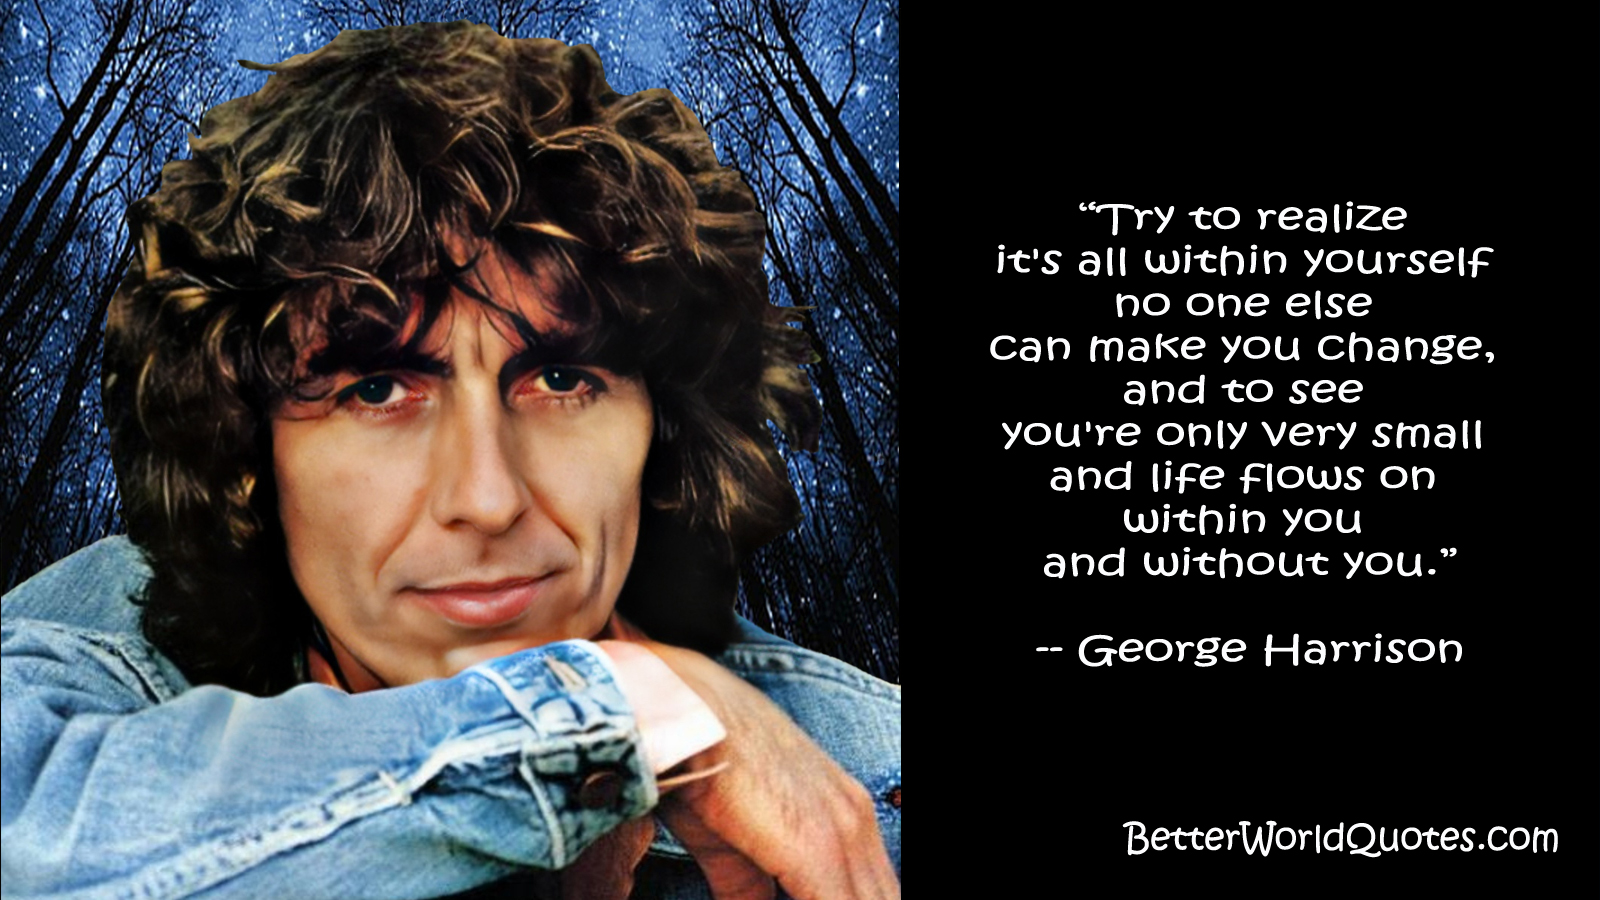 George Harrison: Try to realize 
it's all within yourself no one else can make you change, and to see you're only very small and life flows on <br>
within you and without you..